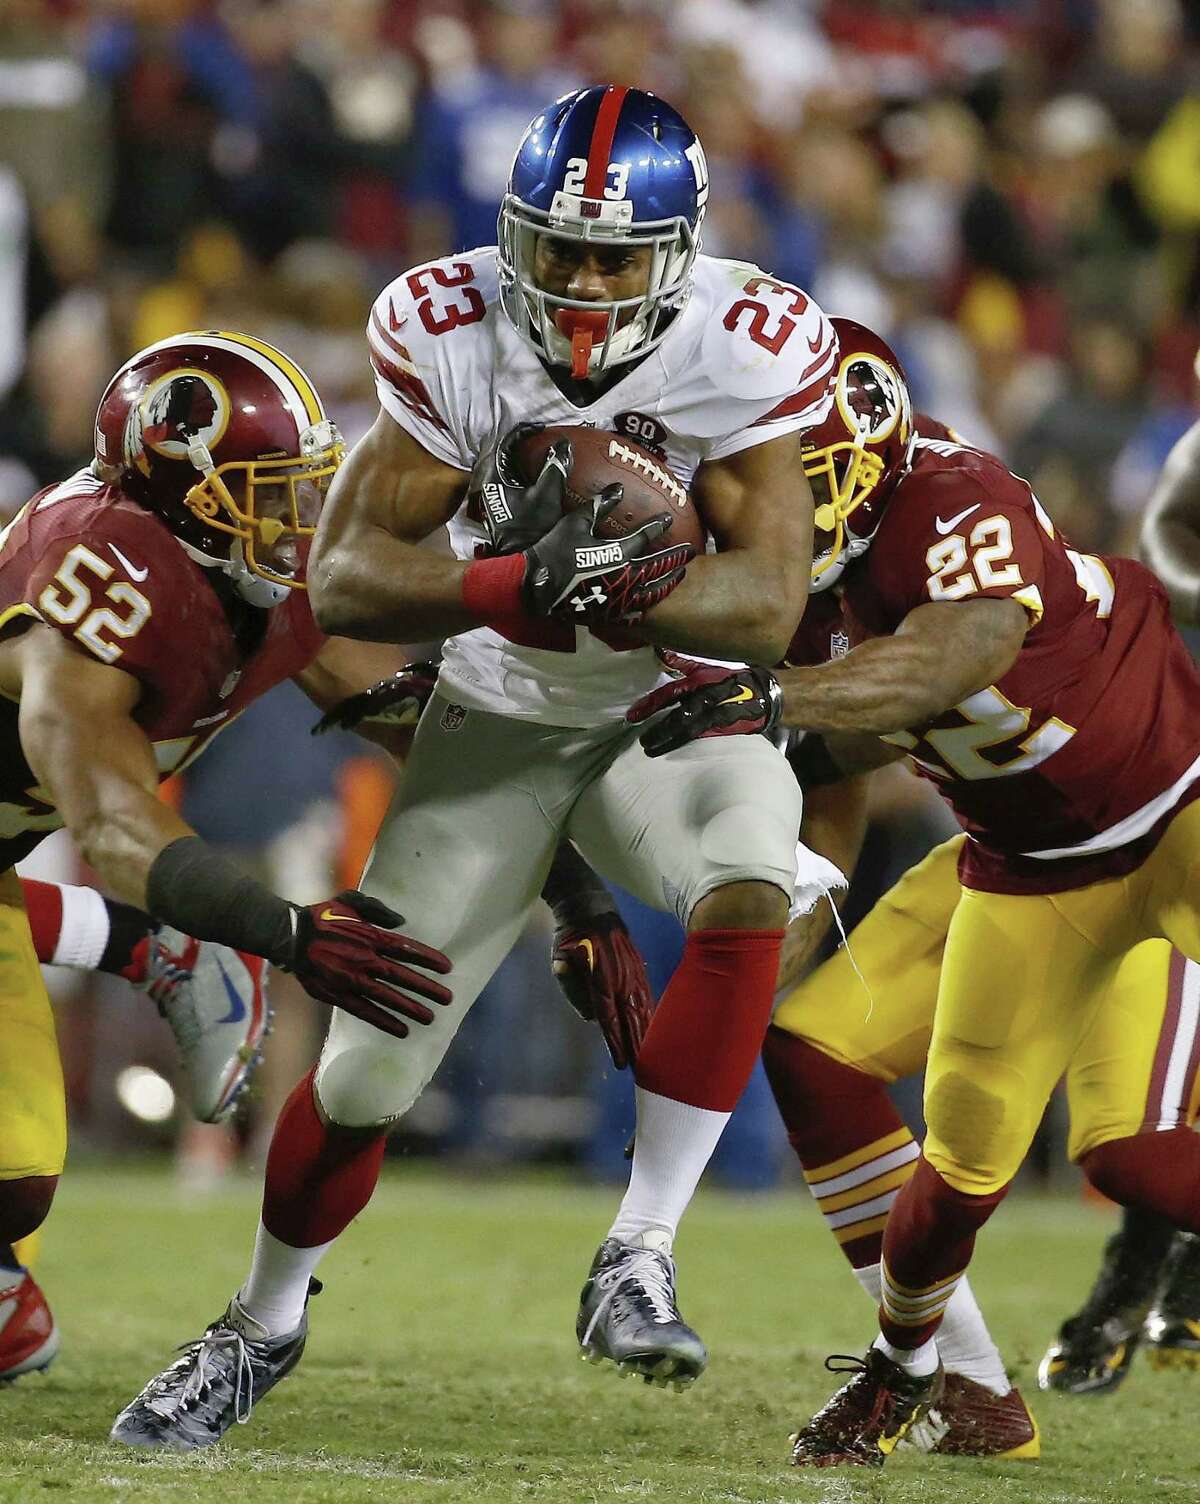 New York Giants running back Rashad Jennings is expected to play against the San Francisco 49ers.